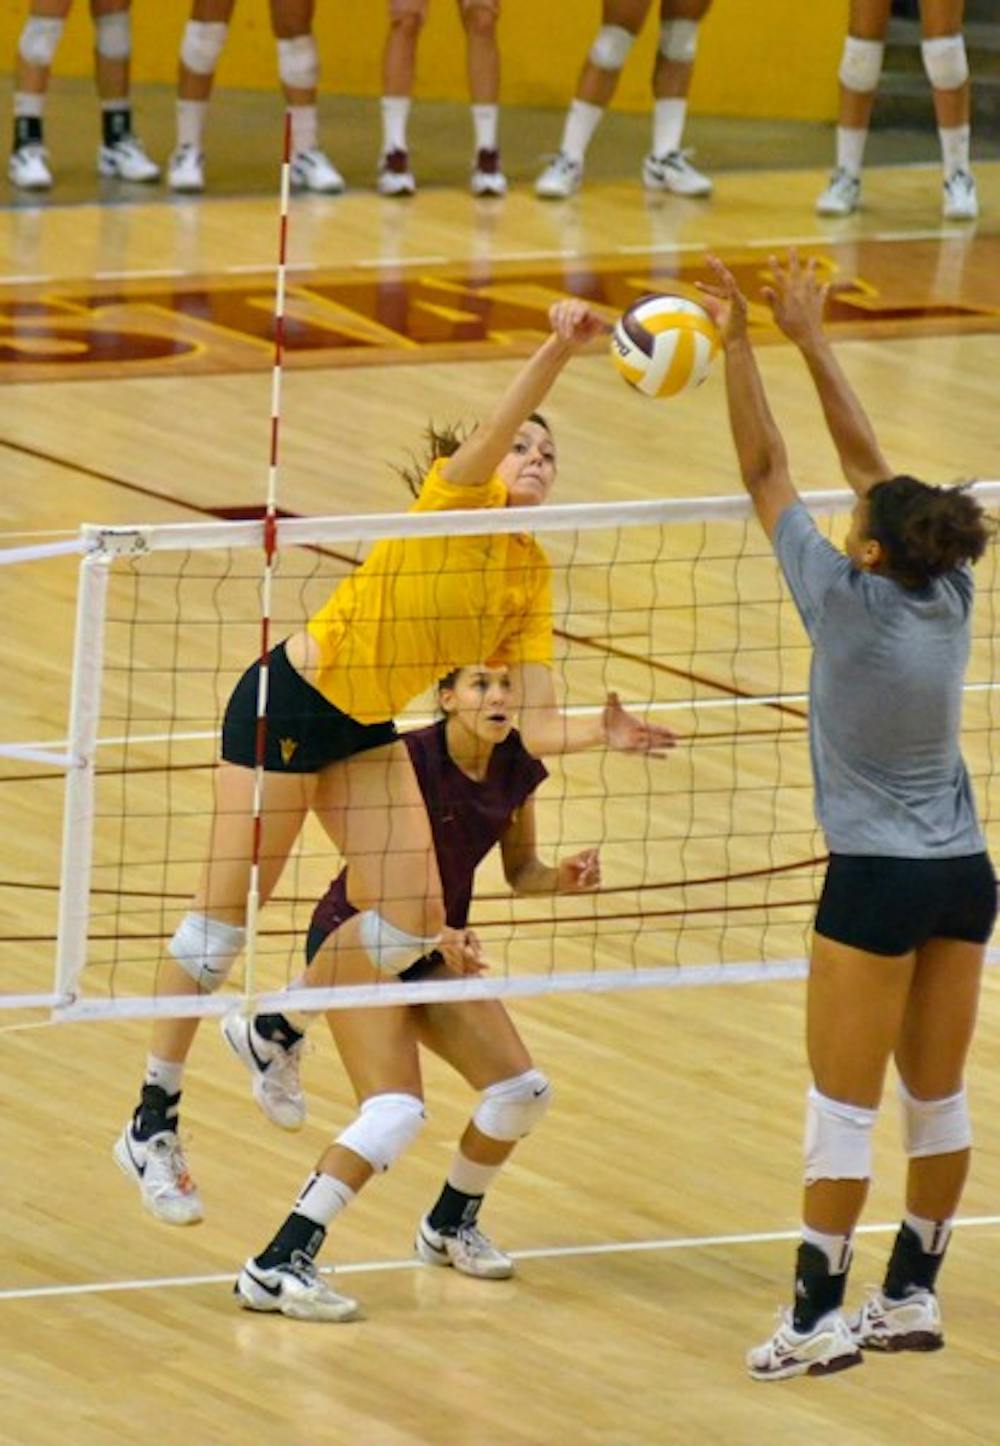 HOME COURT: Redshirt freshman Kylee Terhune spikes the ball in the Sun Devils’ Alumnae Match in August. The Sun Devils are back in Wells Fargo Arena this weekend to play No. 4 Washington and Washington State. (Photo by Aaron Lavinsky)